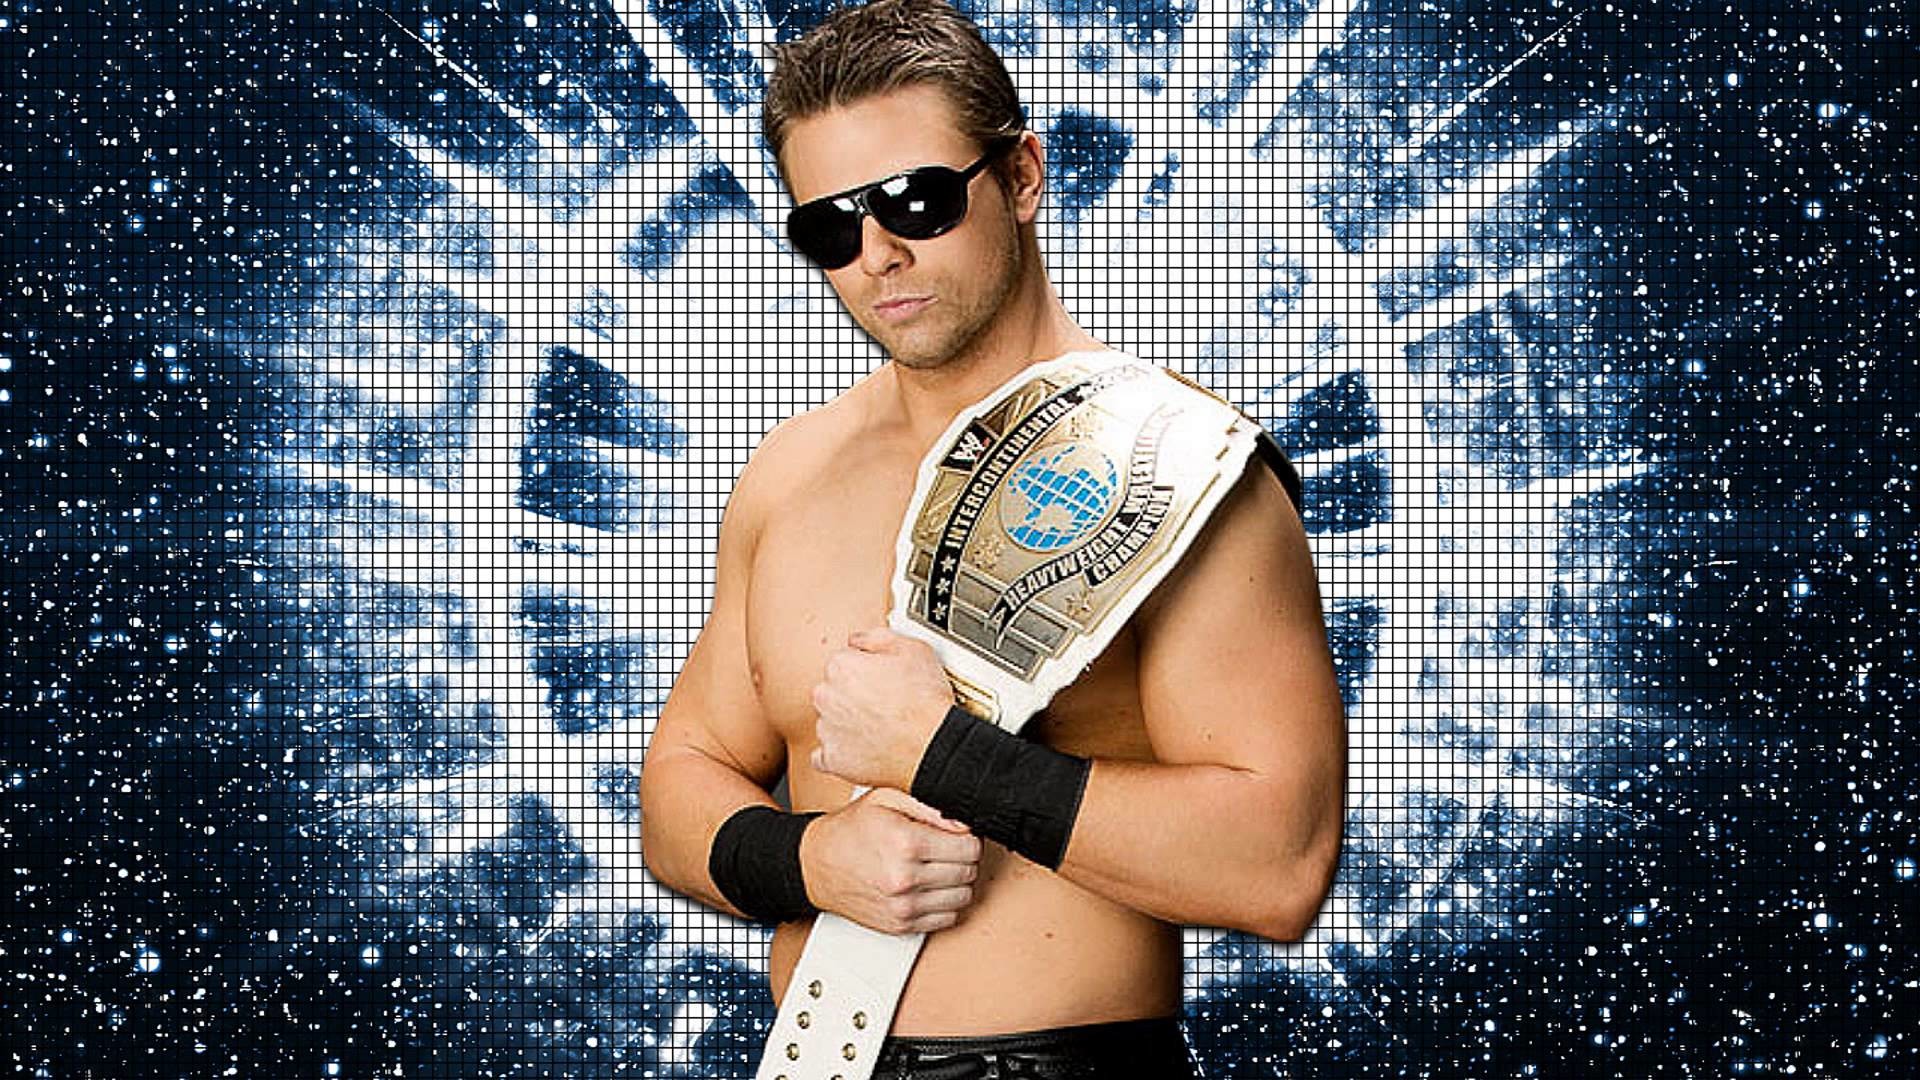 1920x1080 2014: The Miz 8th WWE Theme Song - I Came to Play (V2;